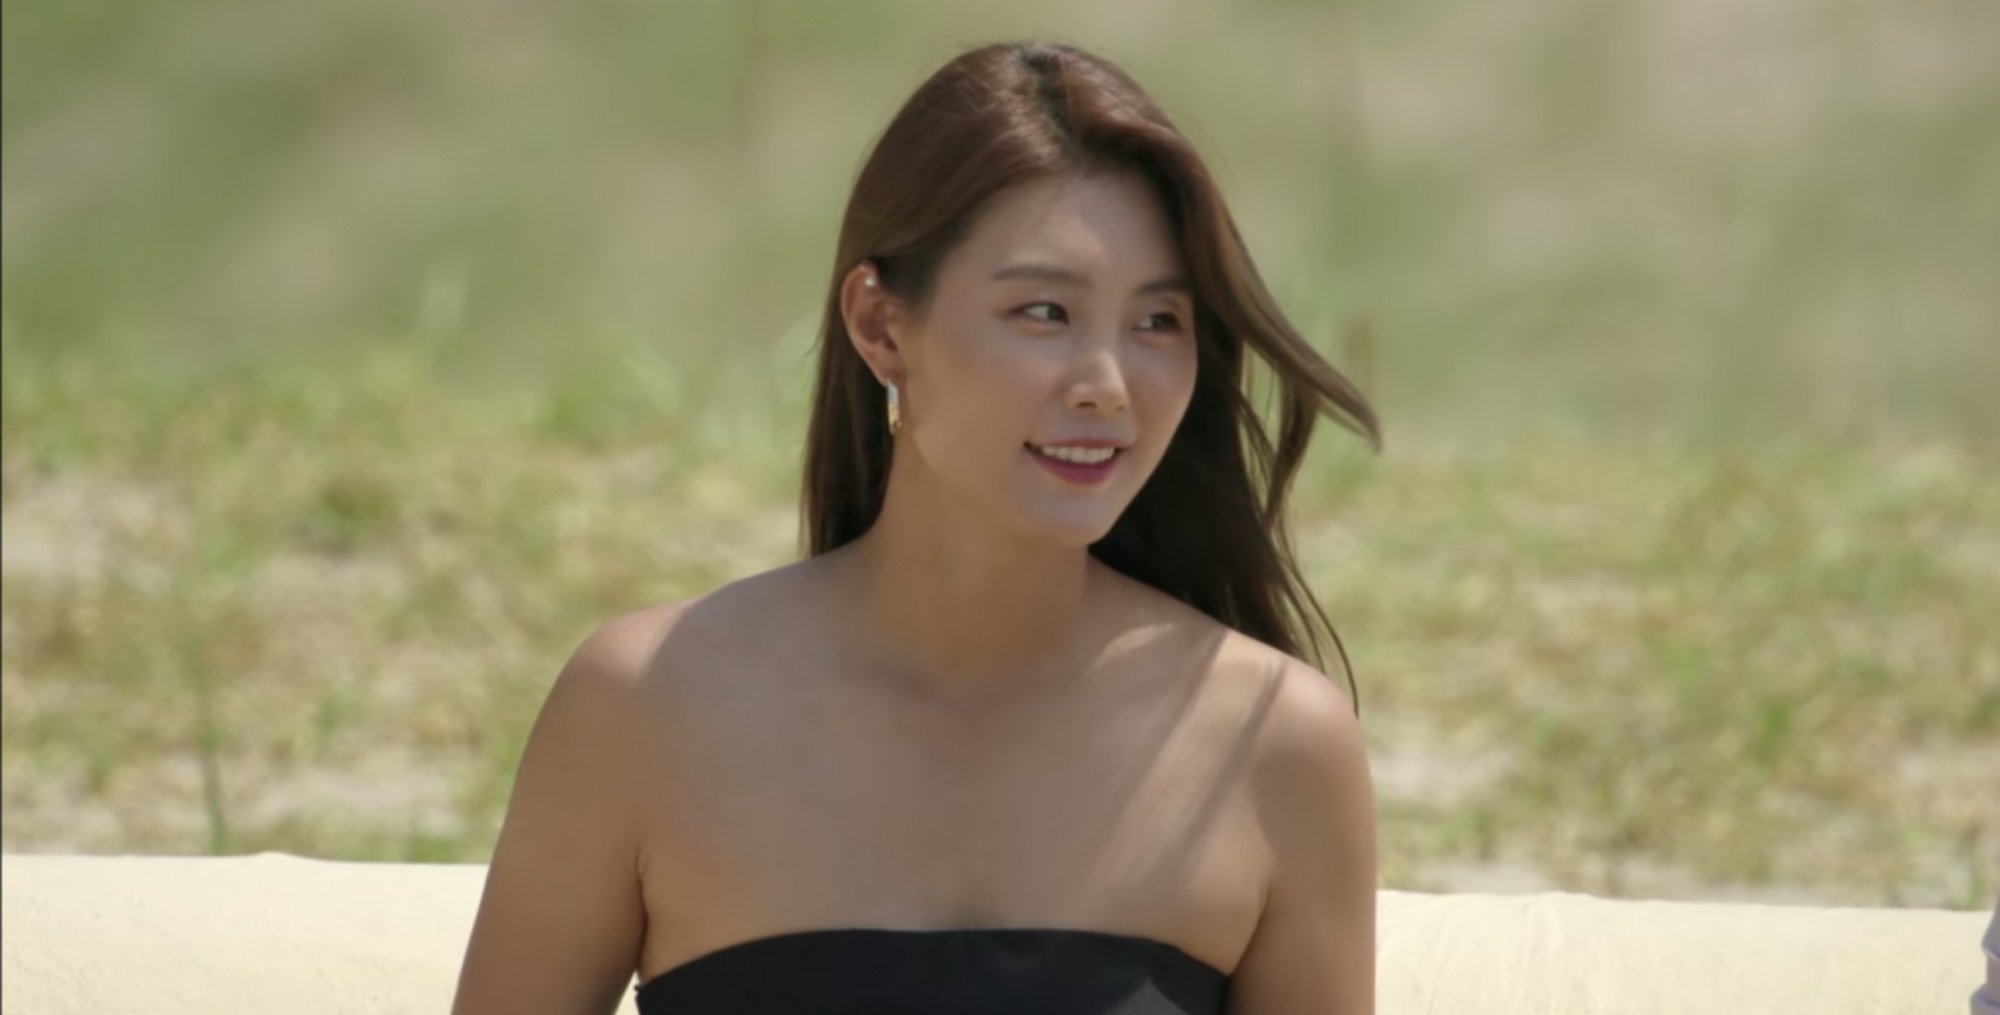 So-yeon from 'Single's Inferno' Korean dating show wearing off-shoulder dress.